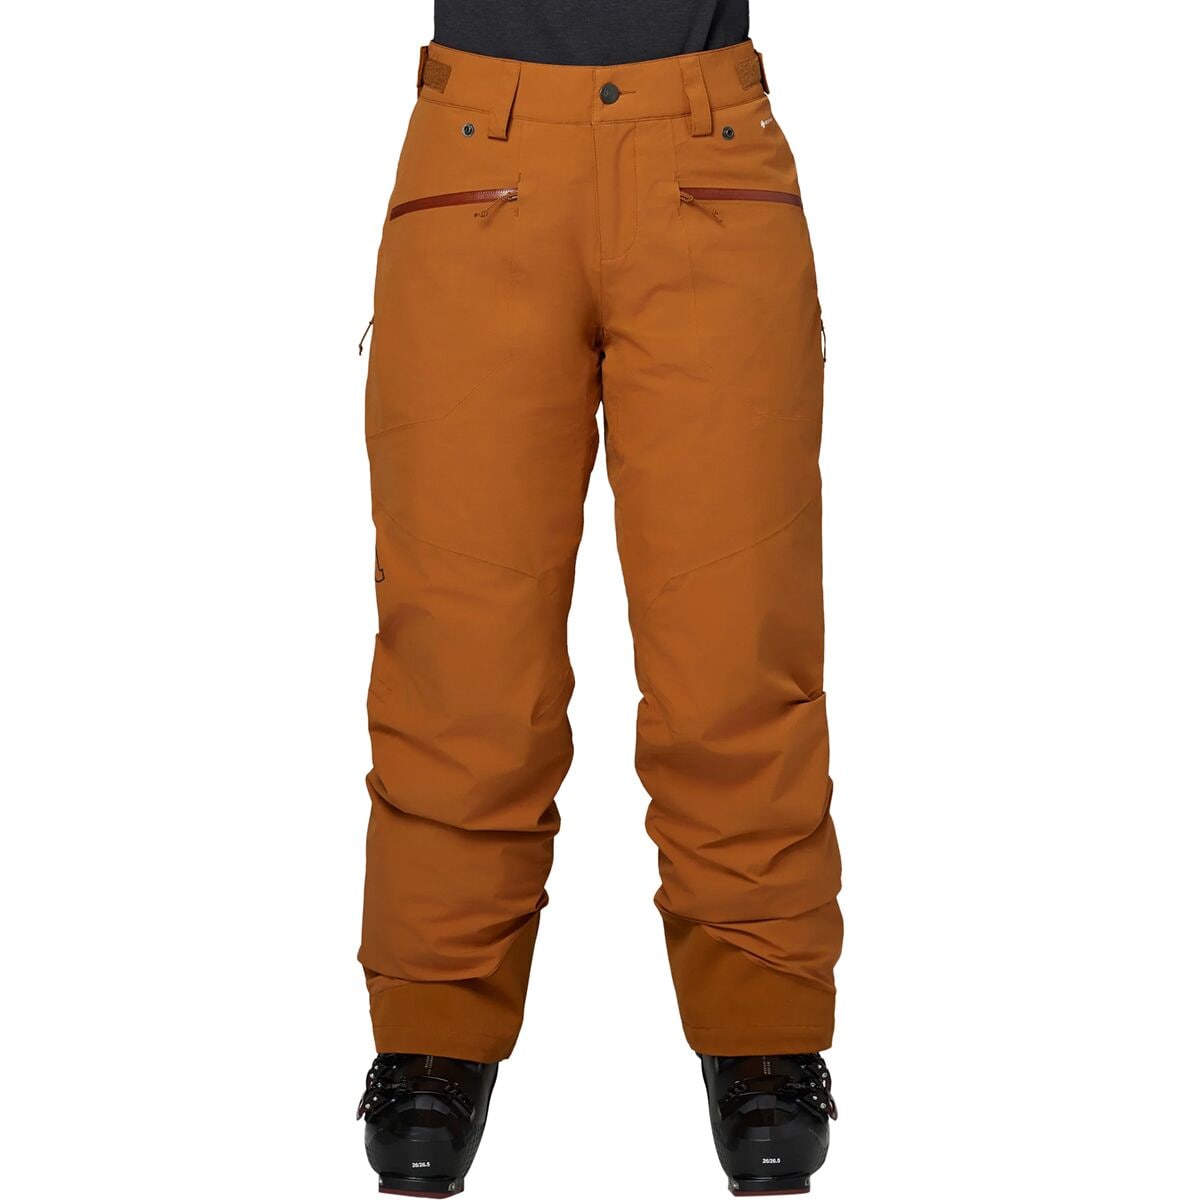 Flylow Fae Insulated Pant - Women's